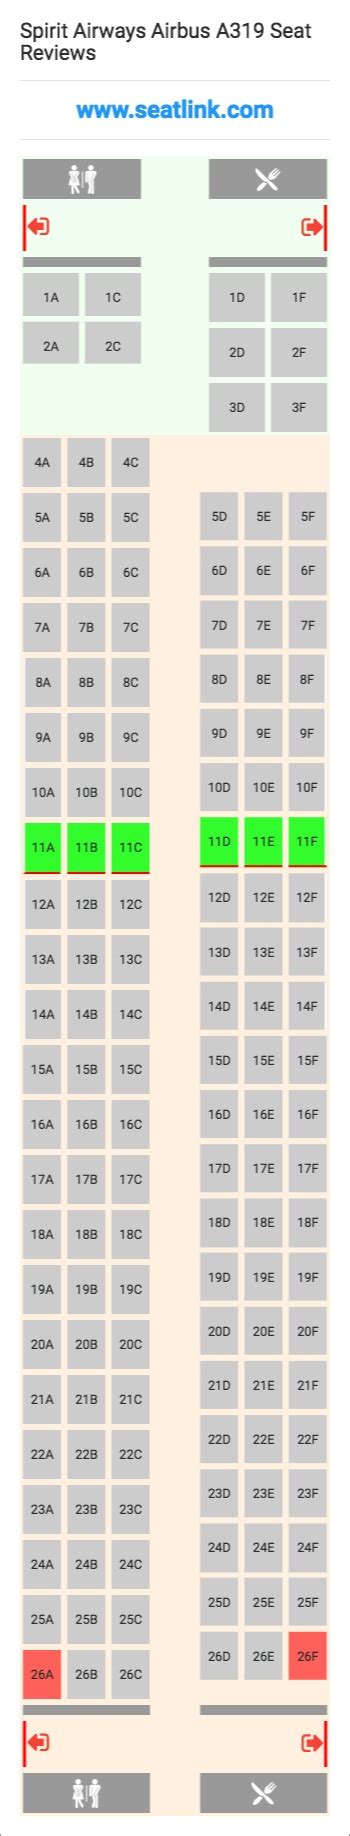 Spirit Airways Airbus A319 Seating Chart Updated January 2020 Seatlink